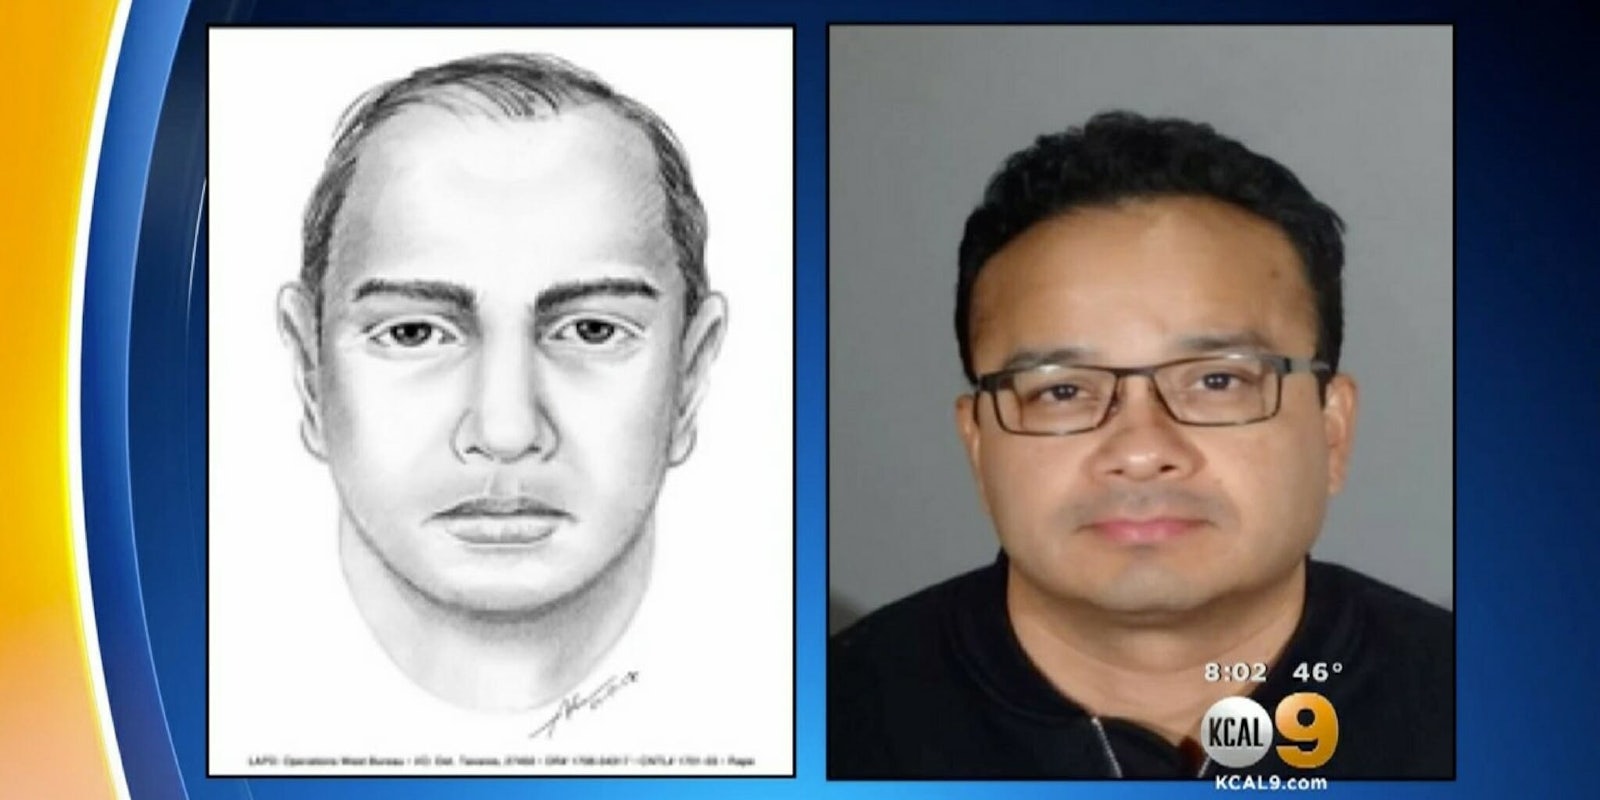 An LAPD police sketch and a mugshot photo of Nicolas Morales.